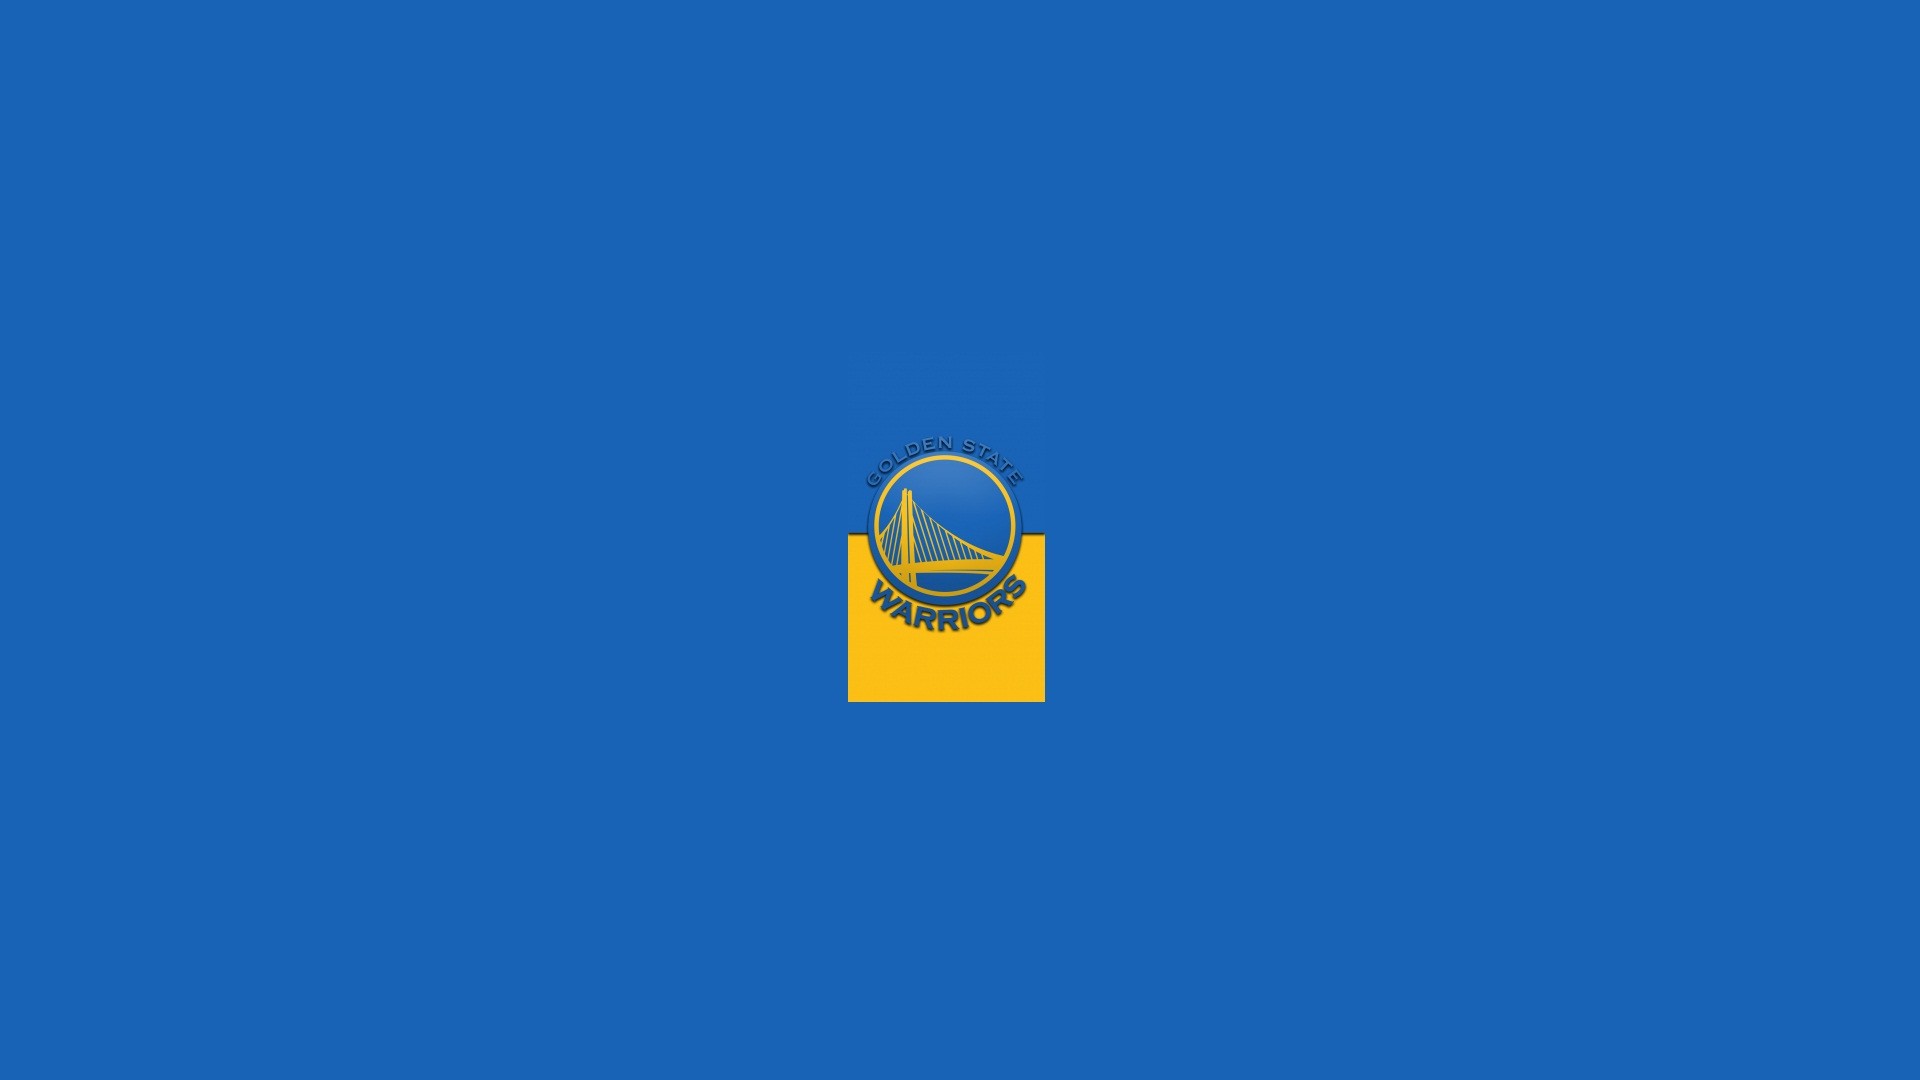 Golden State Warriors Logo Wallpaper HD with image dimensions 1920x1080 pixel. You can make this wallpaper for your Desktop Computer Backgrounds, Windows or Mac Screensavers, iPhone Lock screen, Tablet or Android and another Mobile Phone device